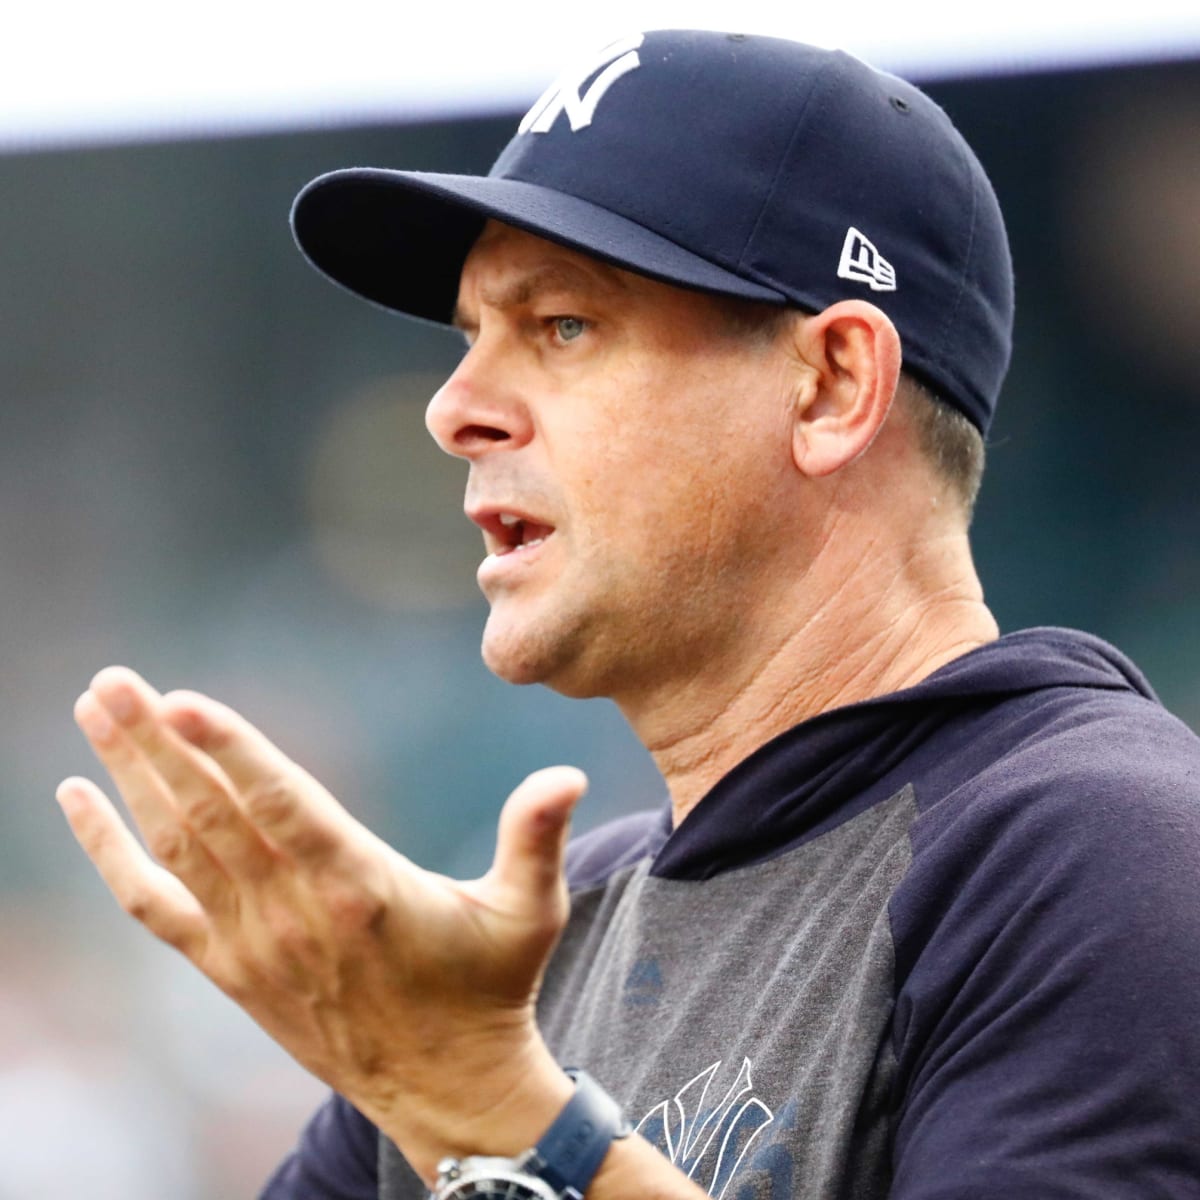 Red Sox sign-stealing punishment: Yankees' Aaron Boone reacts to